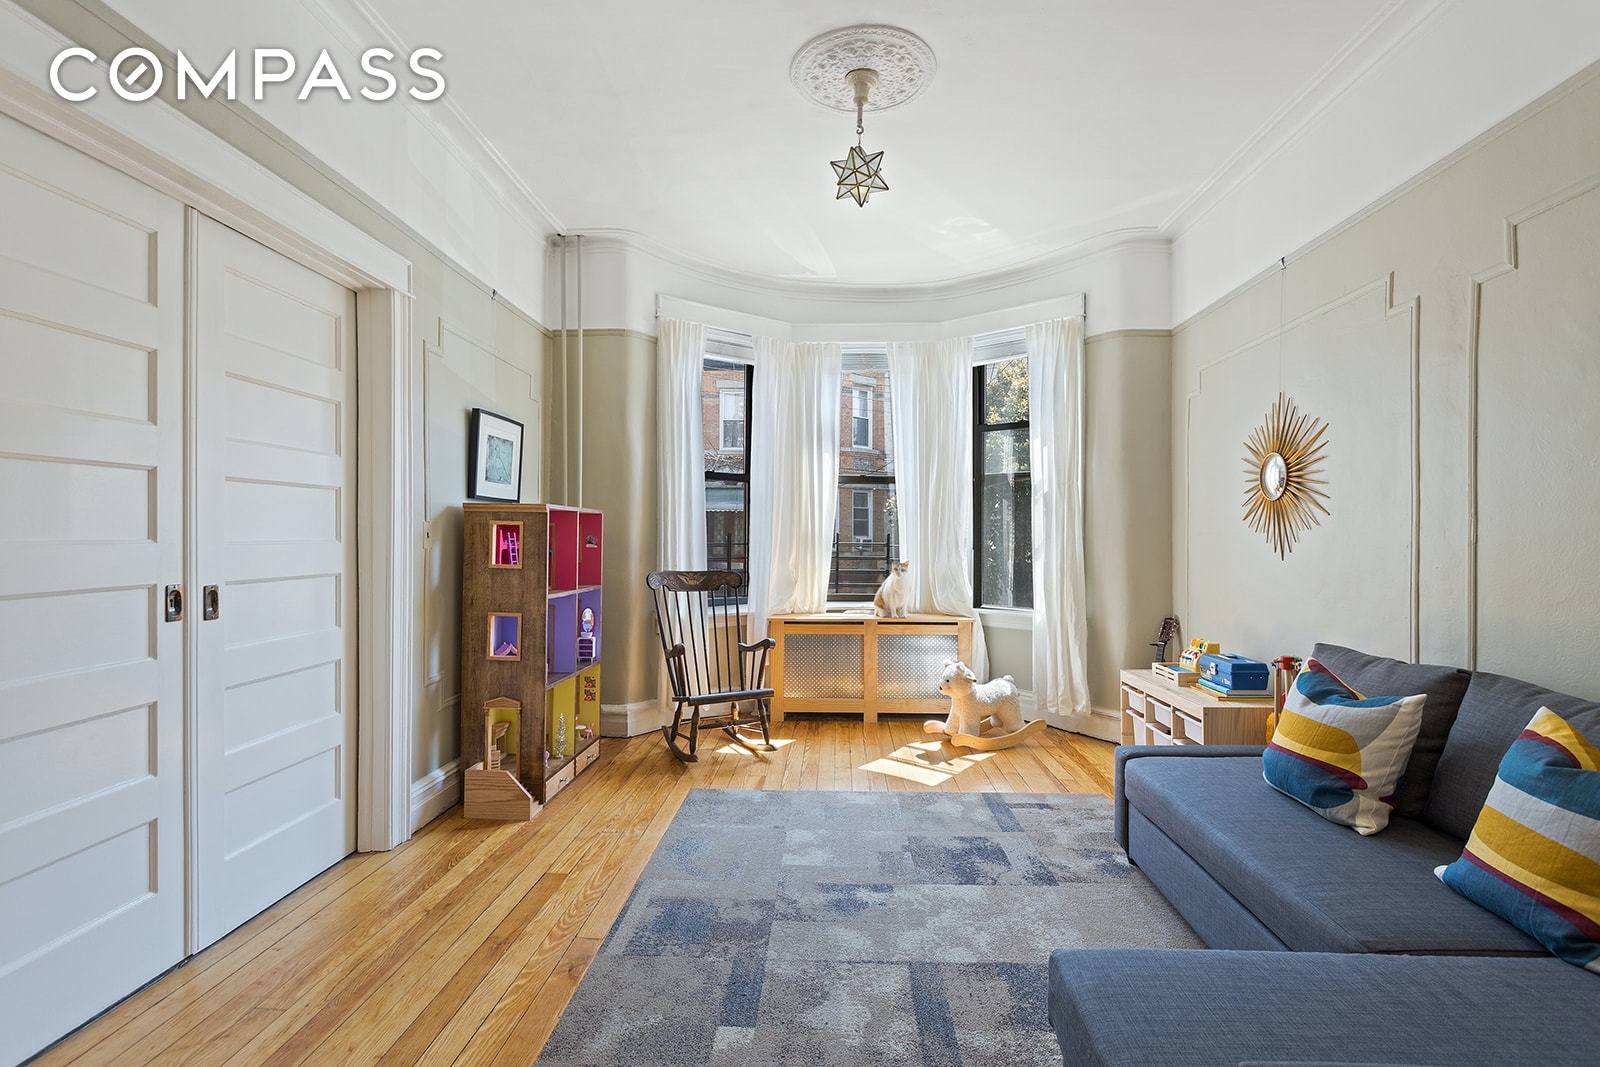 60 65 68th Road is a Renaissance Revival style legal three family row house, designed by Louis Berger amp ; Company, and built circa 1909 ; located in Ridgewood s ...